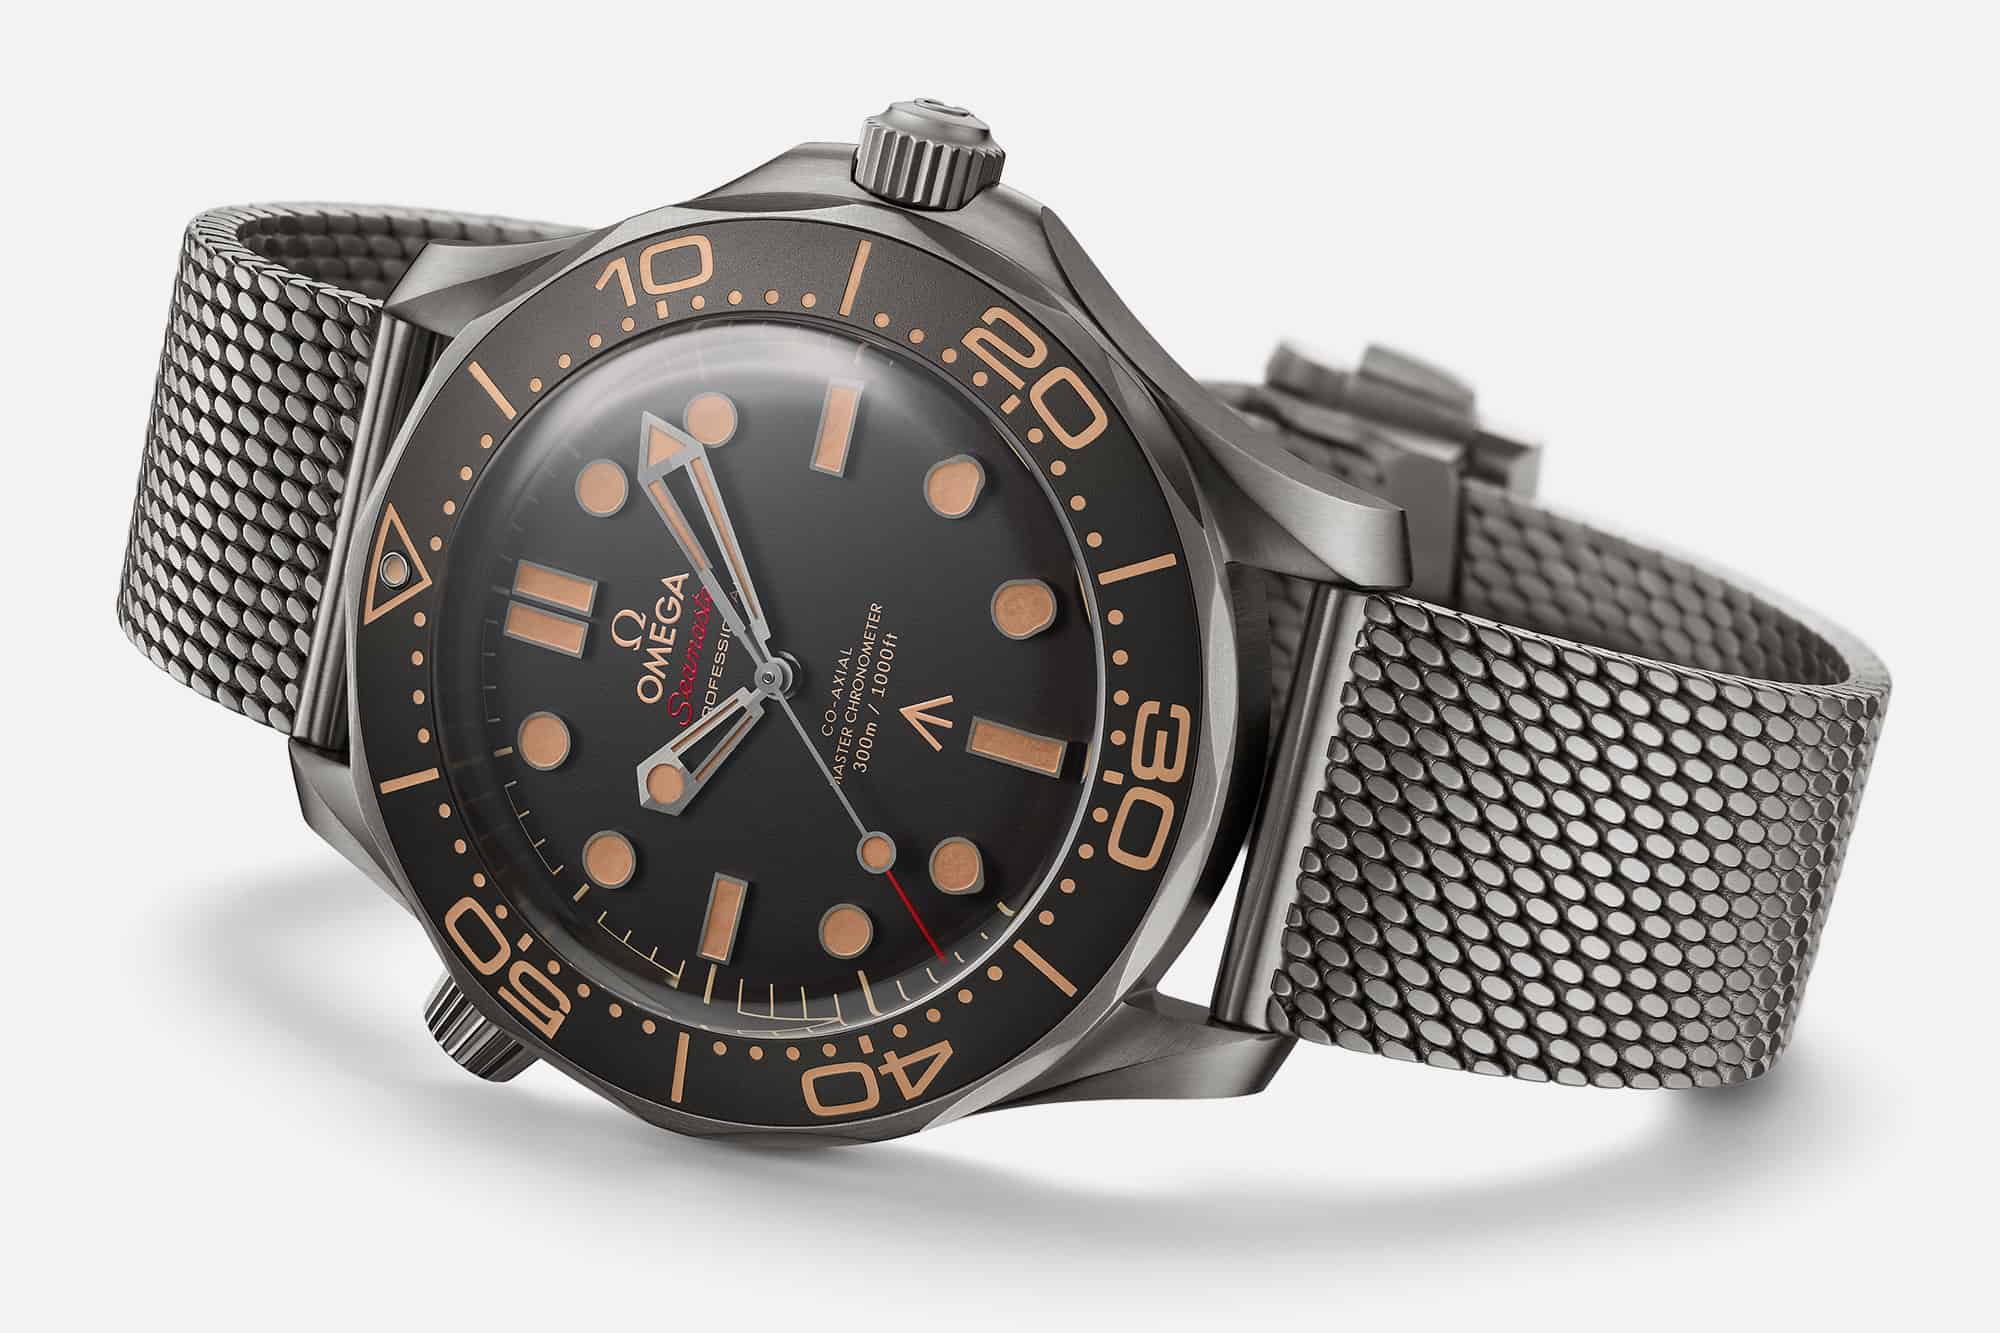 James Bond Gets His Newest Watch: Introducing the Seamaster Diver 300M 007 Edition